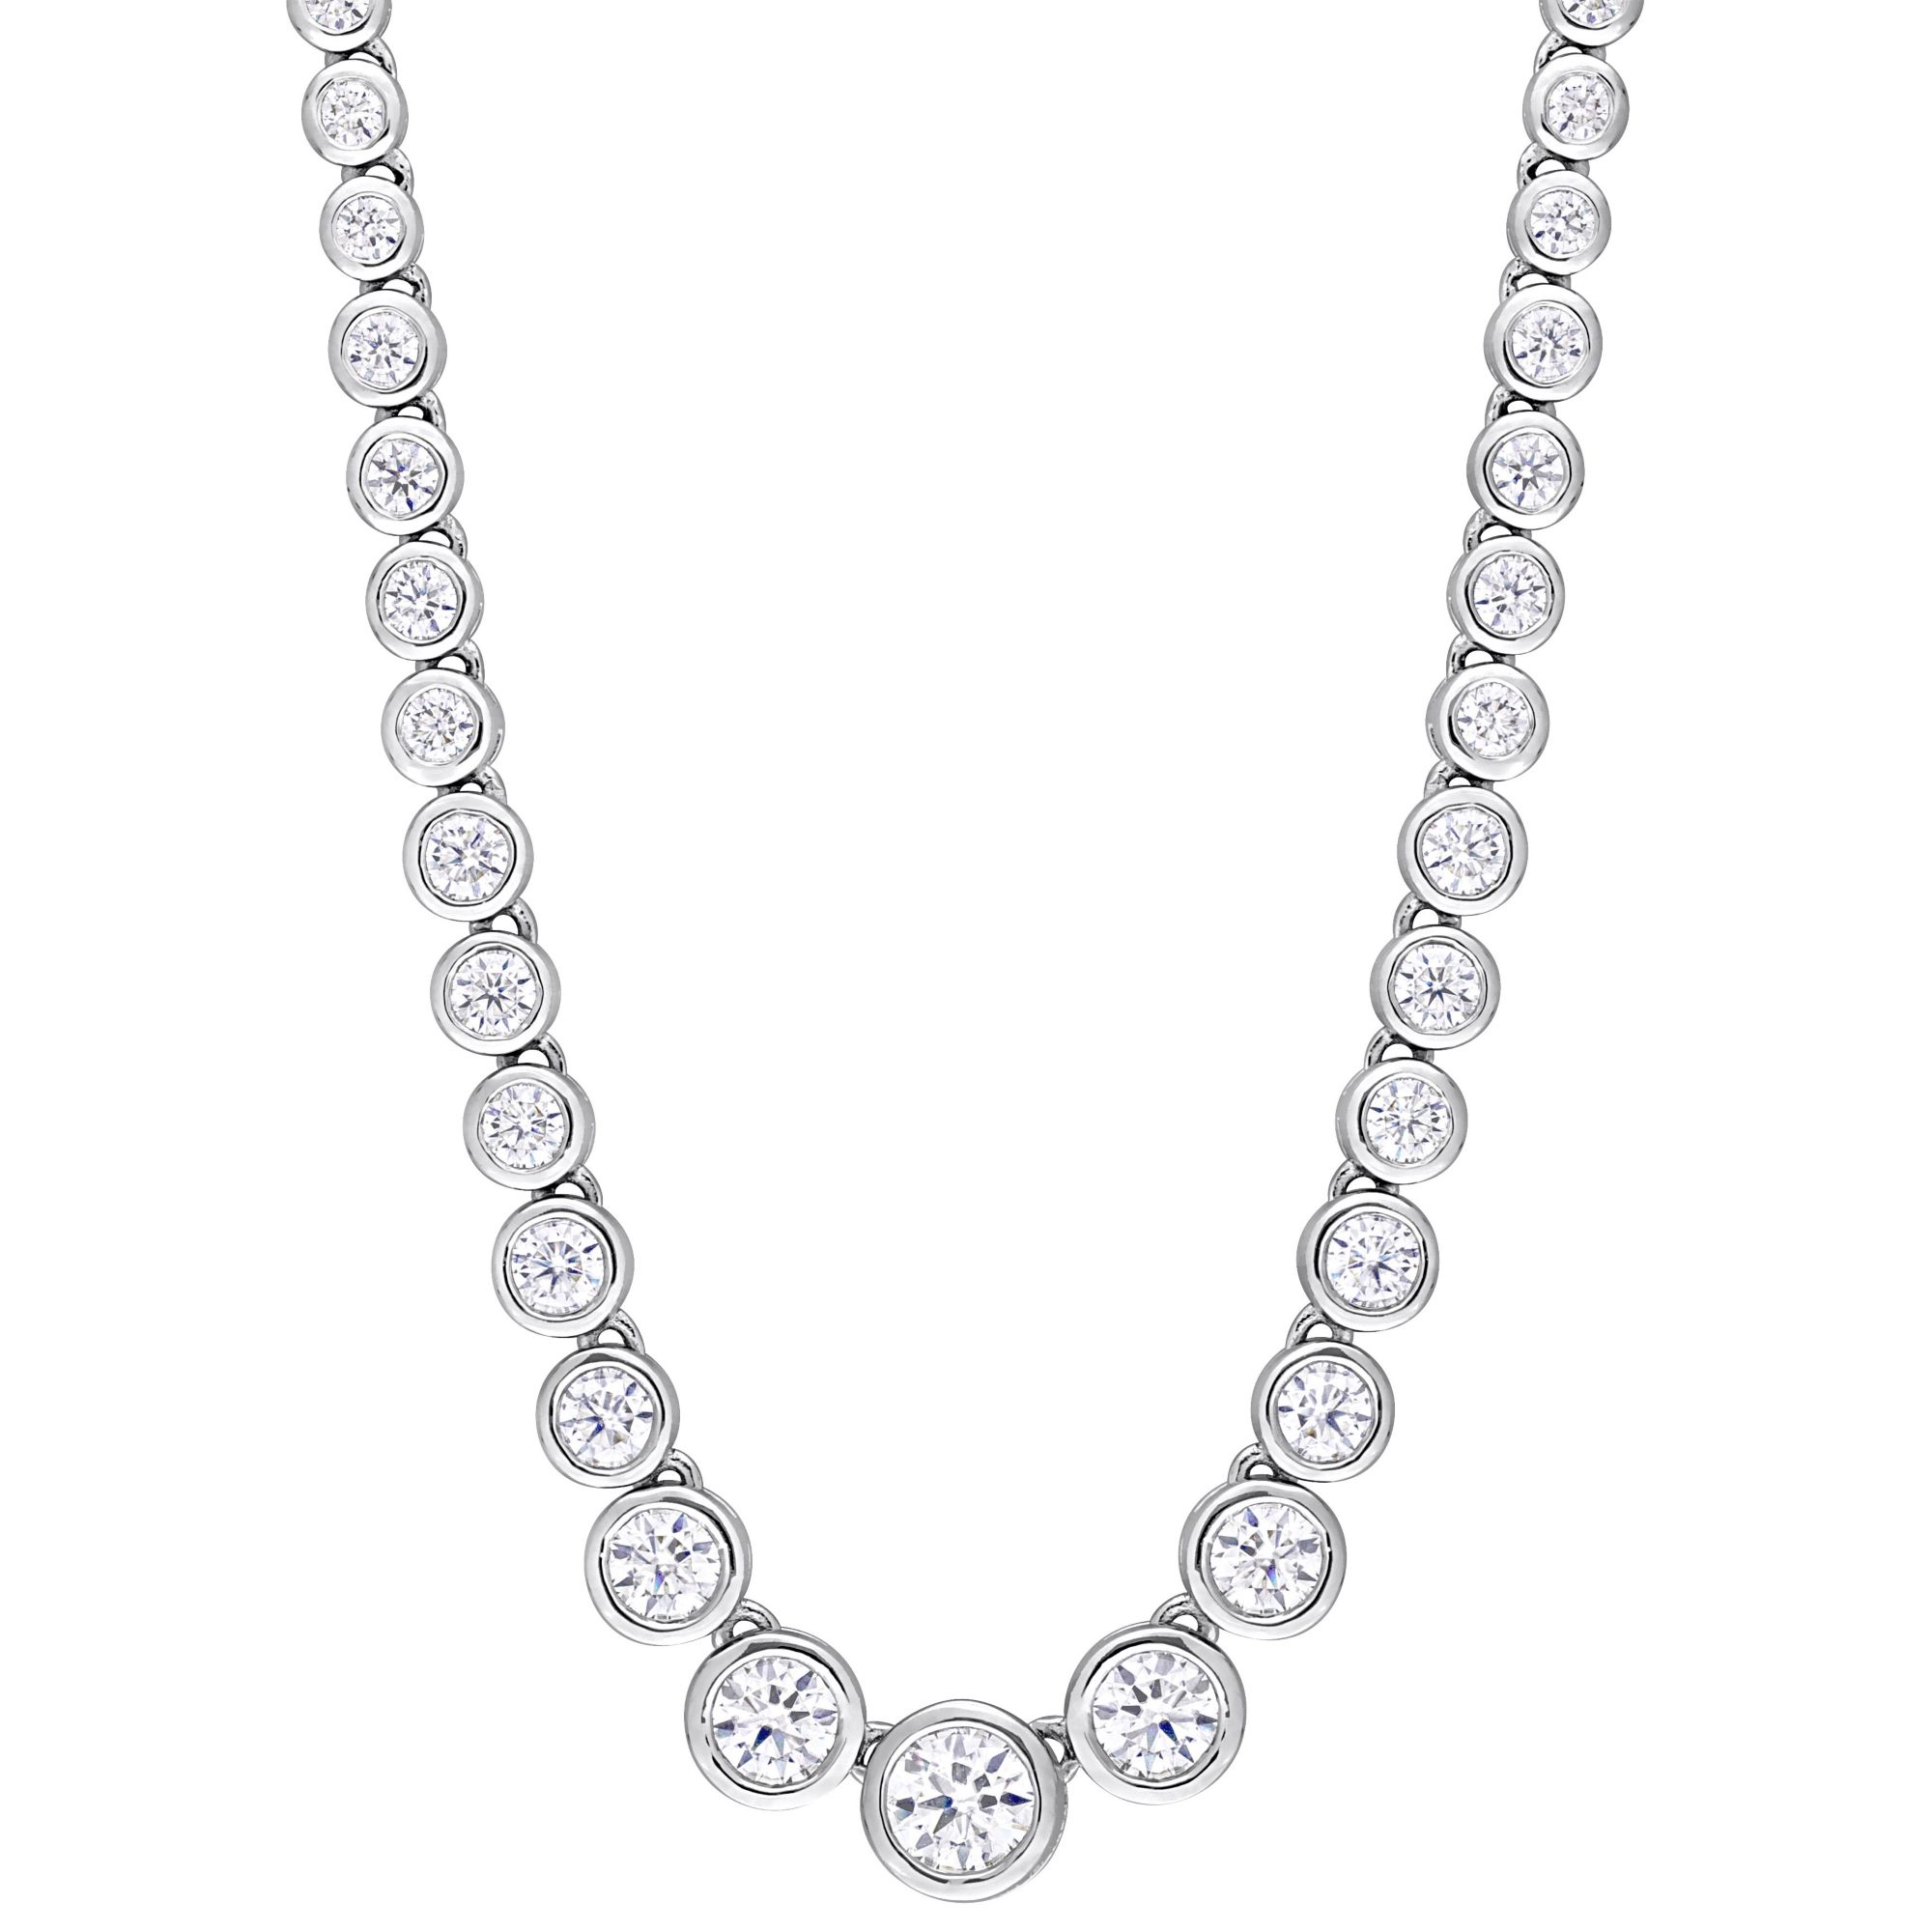 2.75 ct. t.g.w Moissanite Graduated Necklace in Sterling Silver